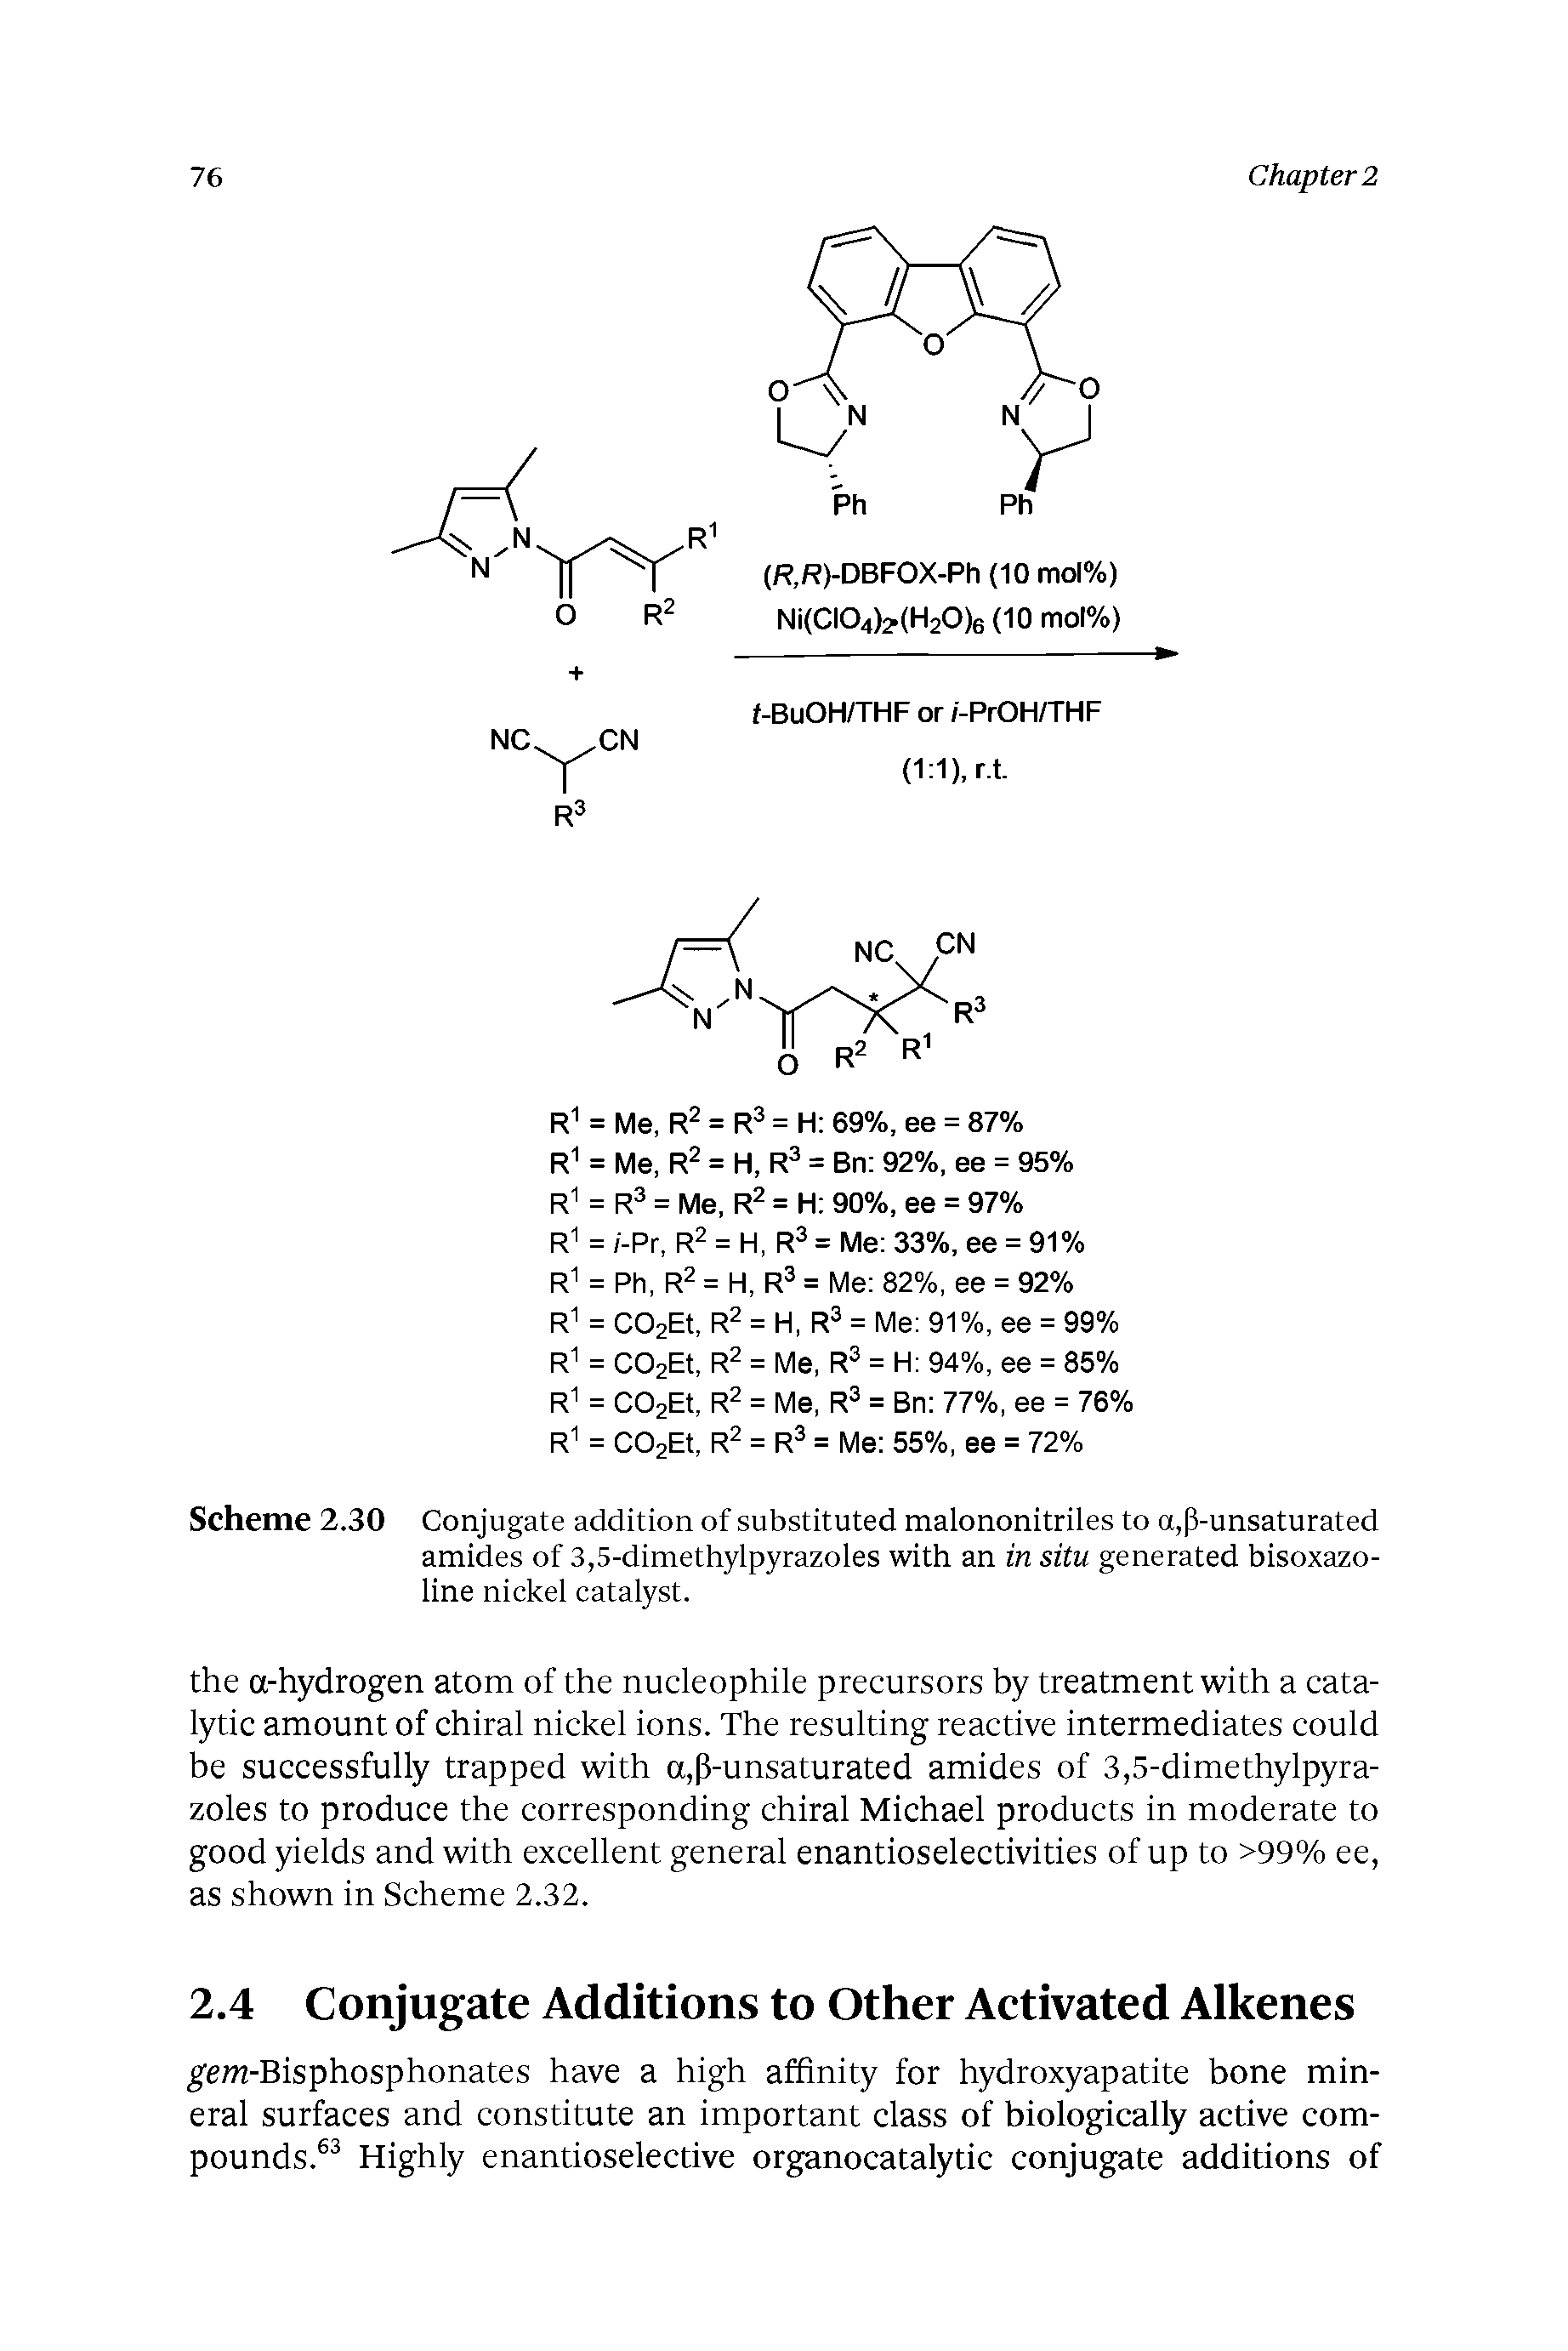 Scheme 2.30 Conjugate addition of substituted malononitriles to a,P-unsaturated amides of 3,5-dimethylpyrazoles with an in situ generated bisoxazo-line nickel catalyst.